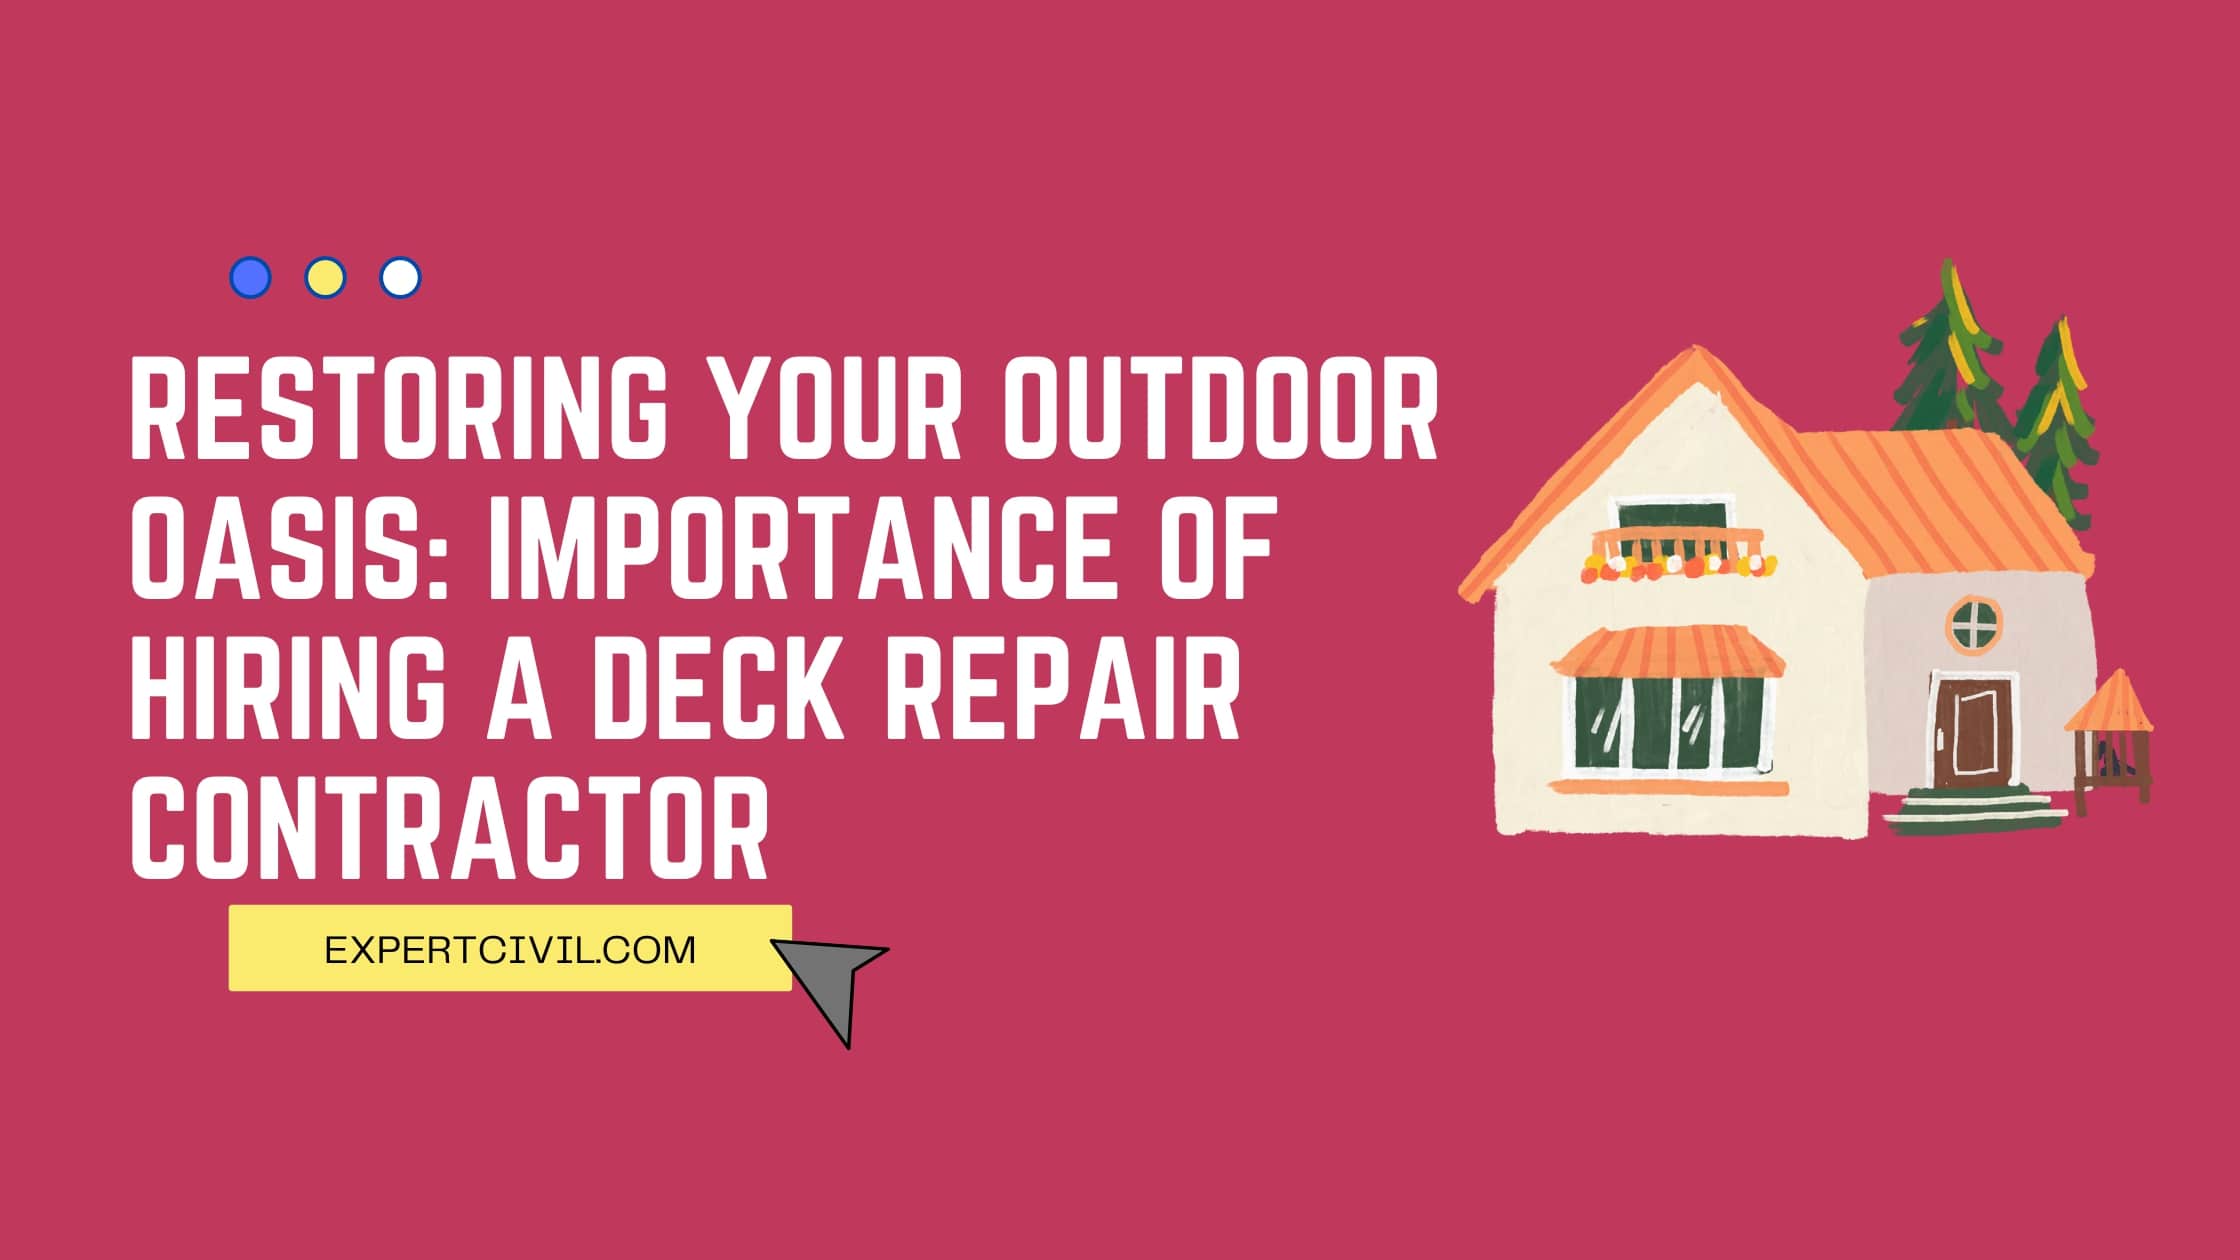 Restoring Your Outdoor Oasis: The Importance of Hiring a Deck Repair Contractor 